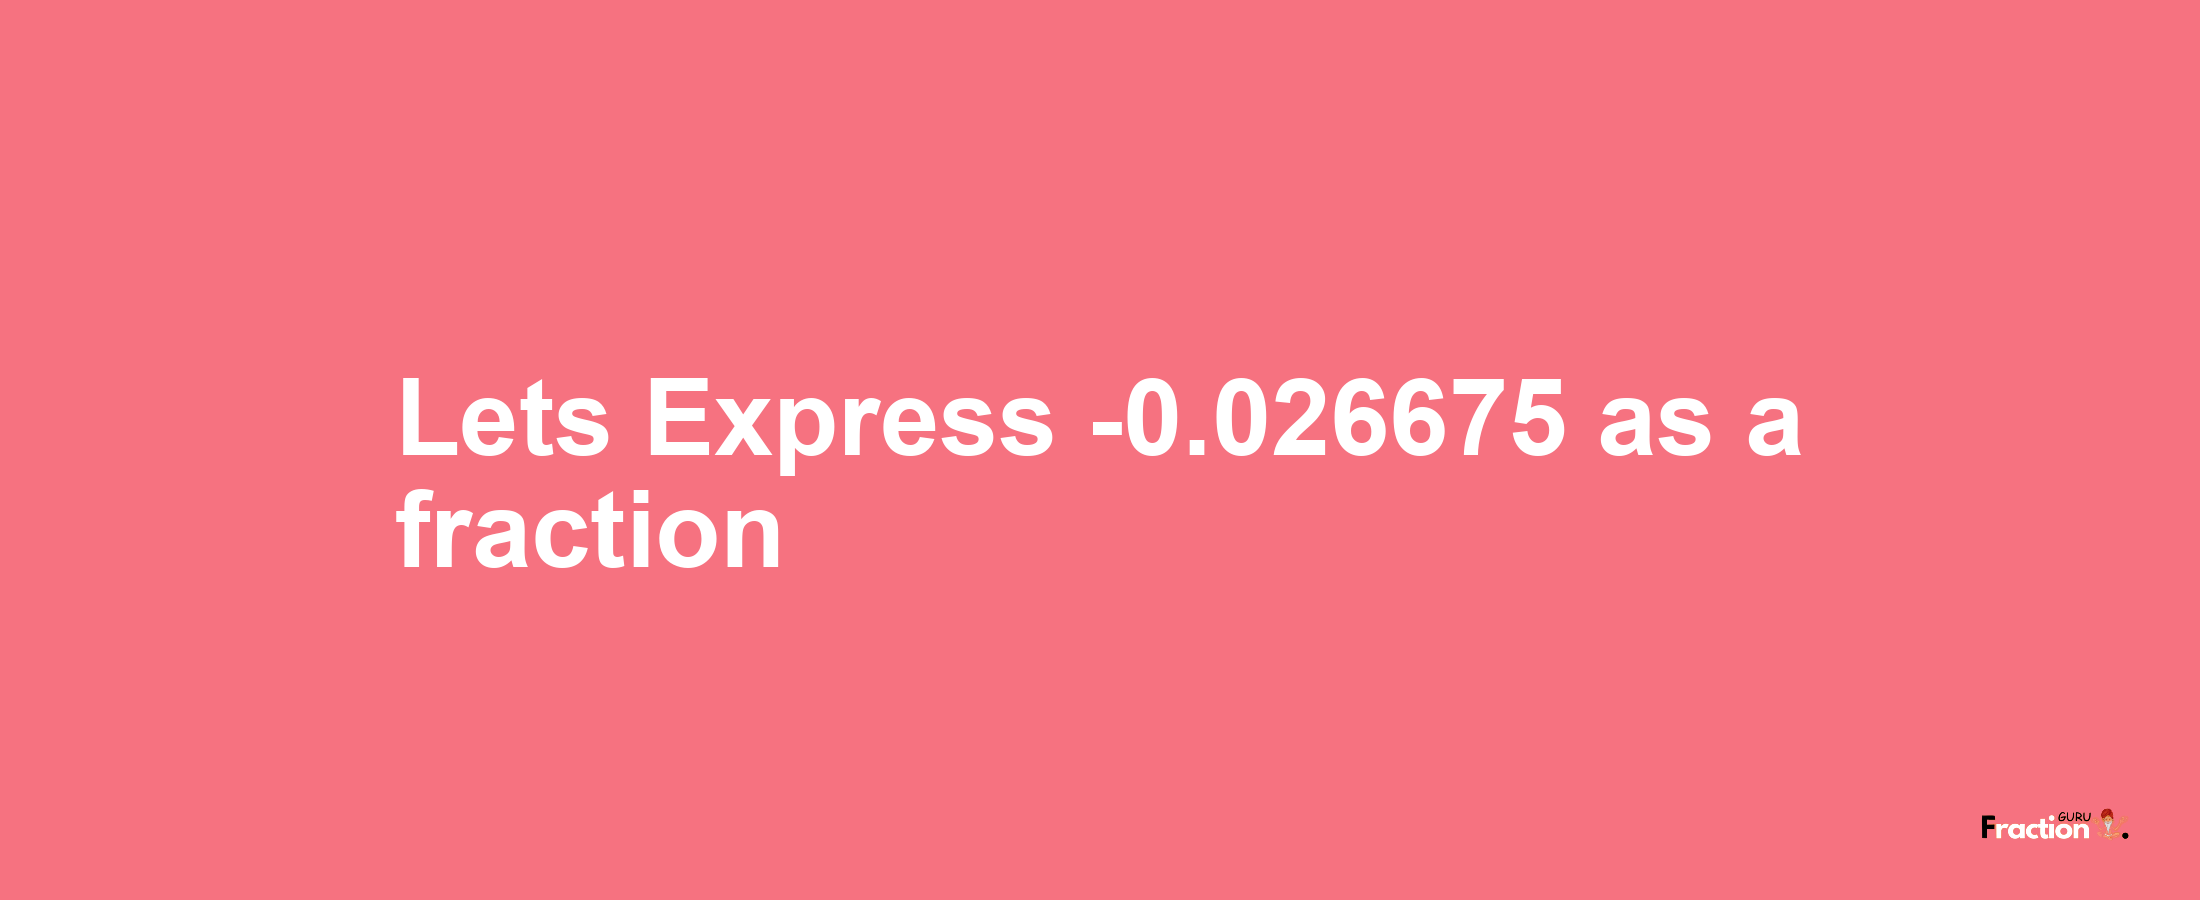 Lets Express -0.026675 as afraction